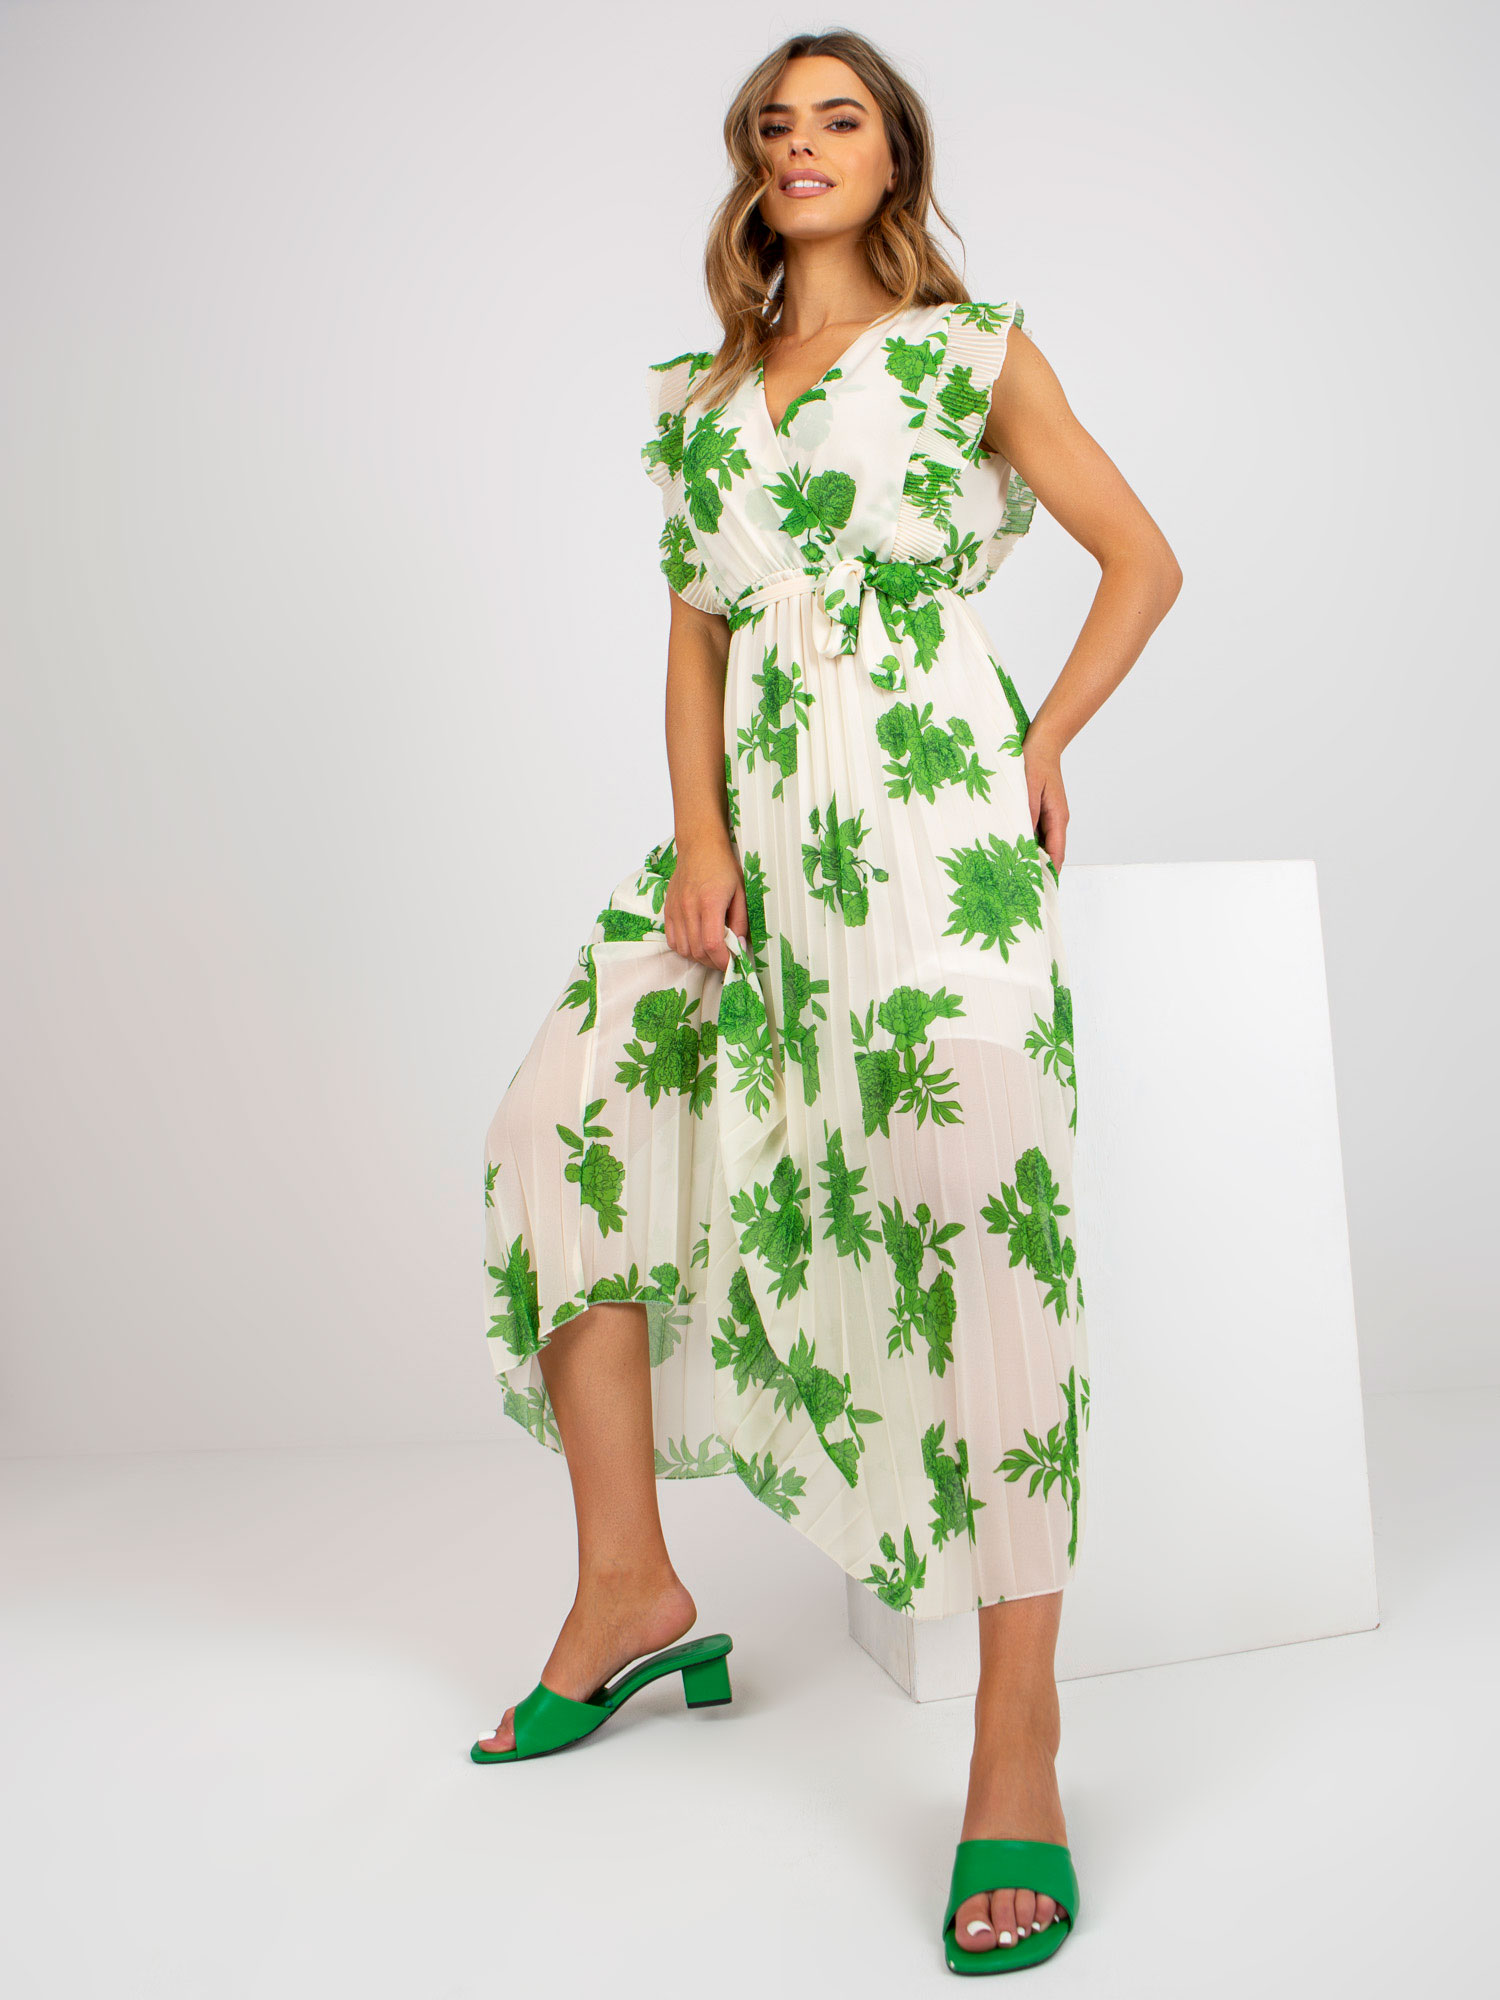 Long, beige and green dress with prints and belt